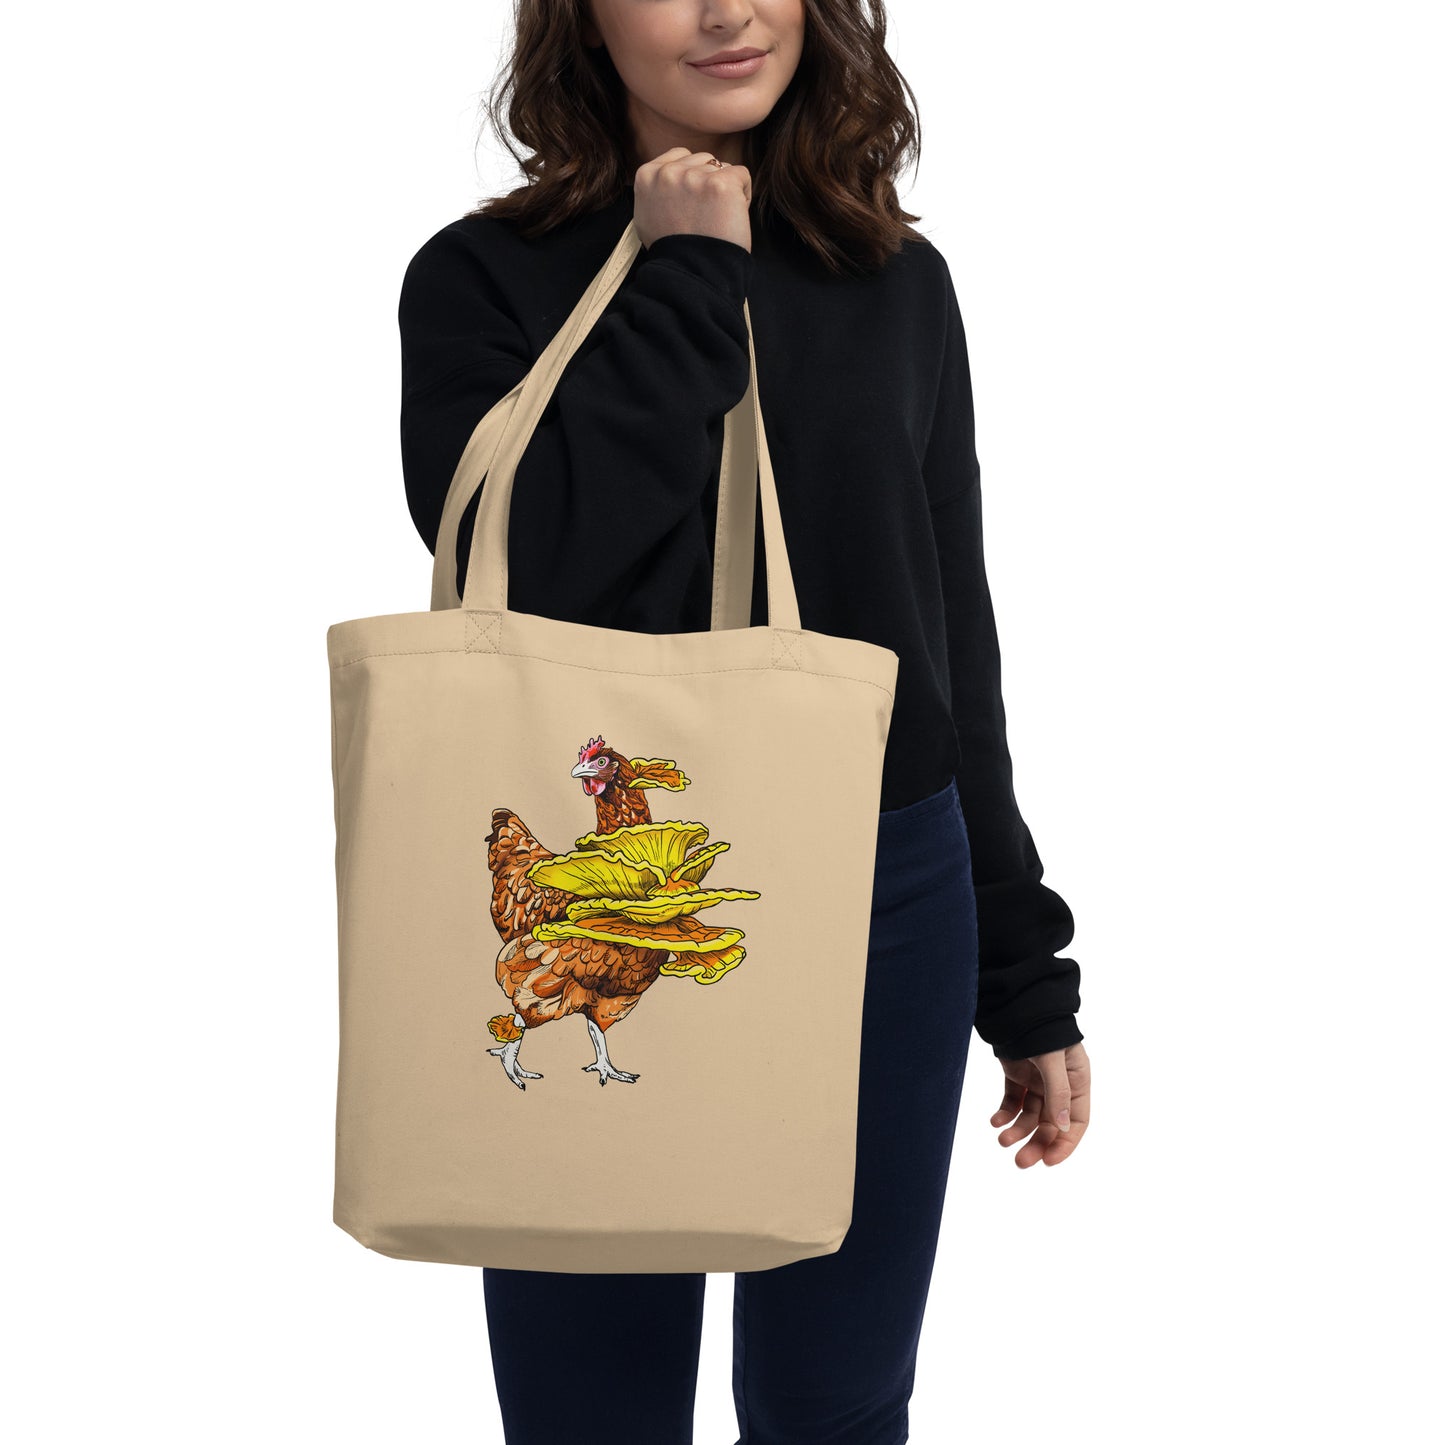 Chicken Of The Woods | Eco-Friendly Tote Bag | Funny Mushroom Artwork